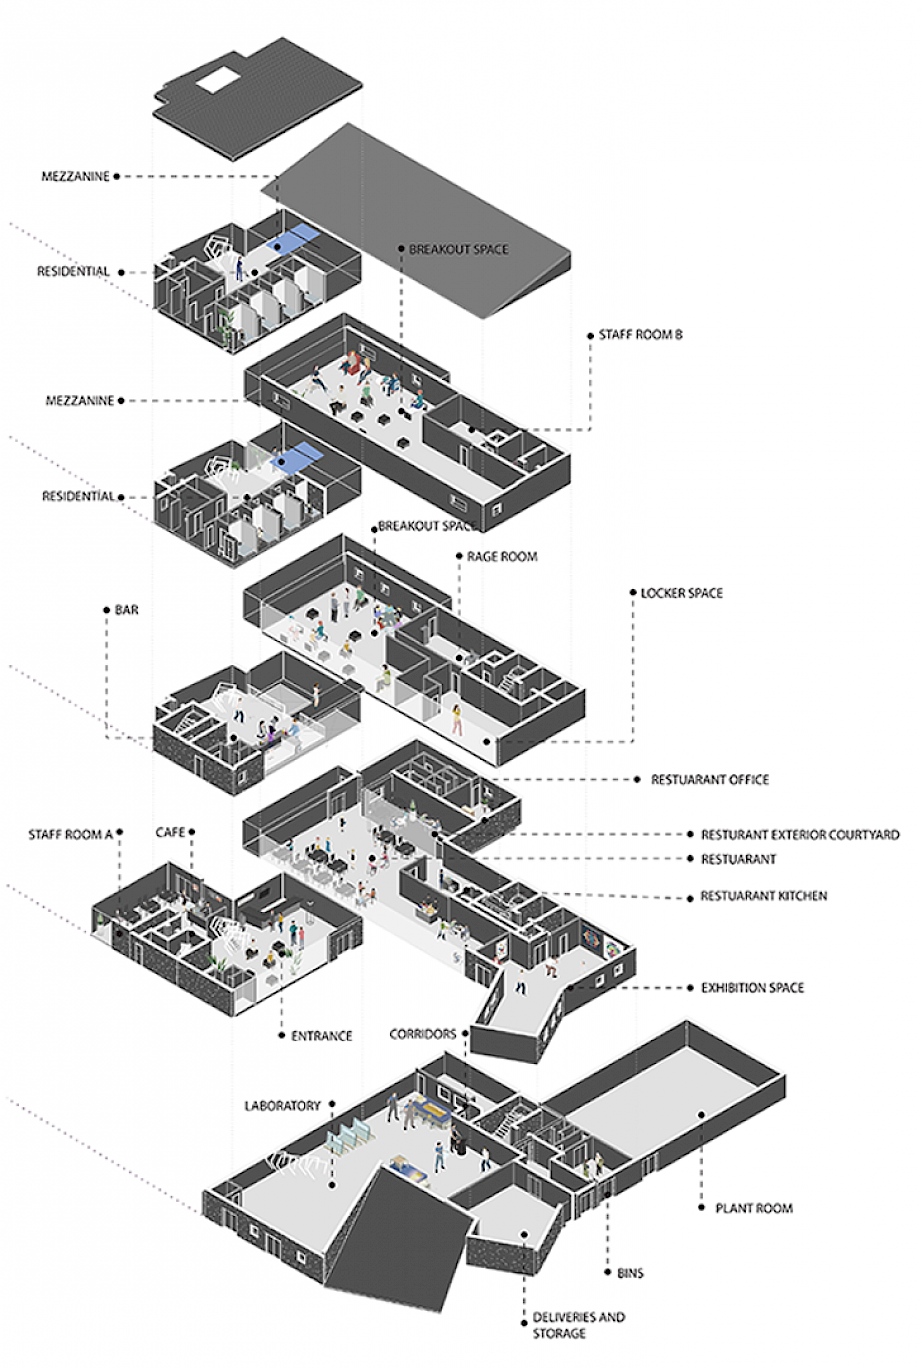 An isometric exploded view of the interior spaces.